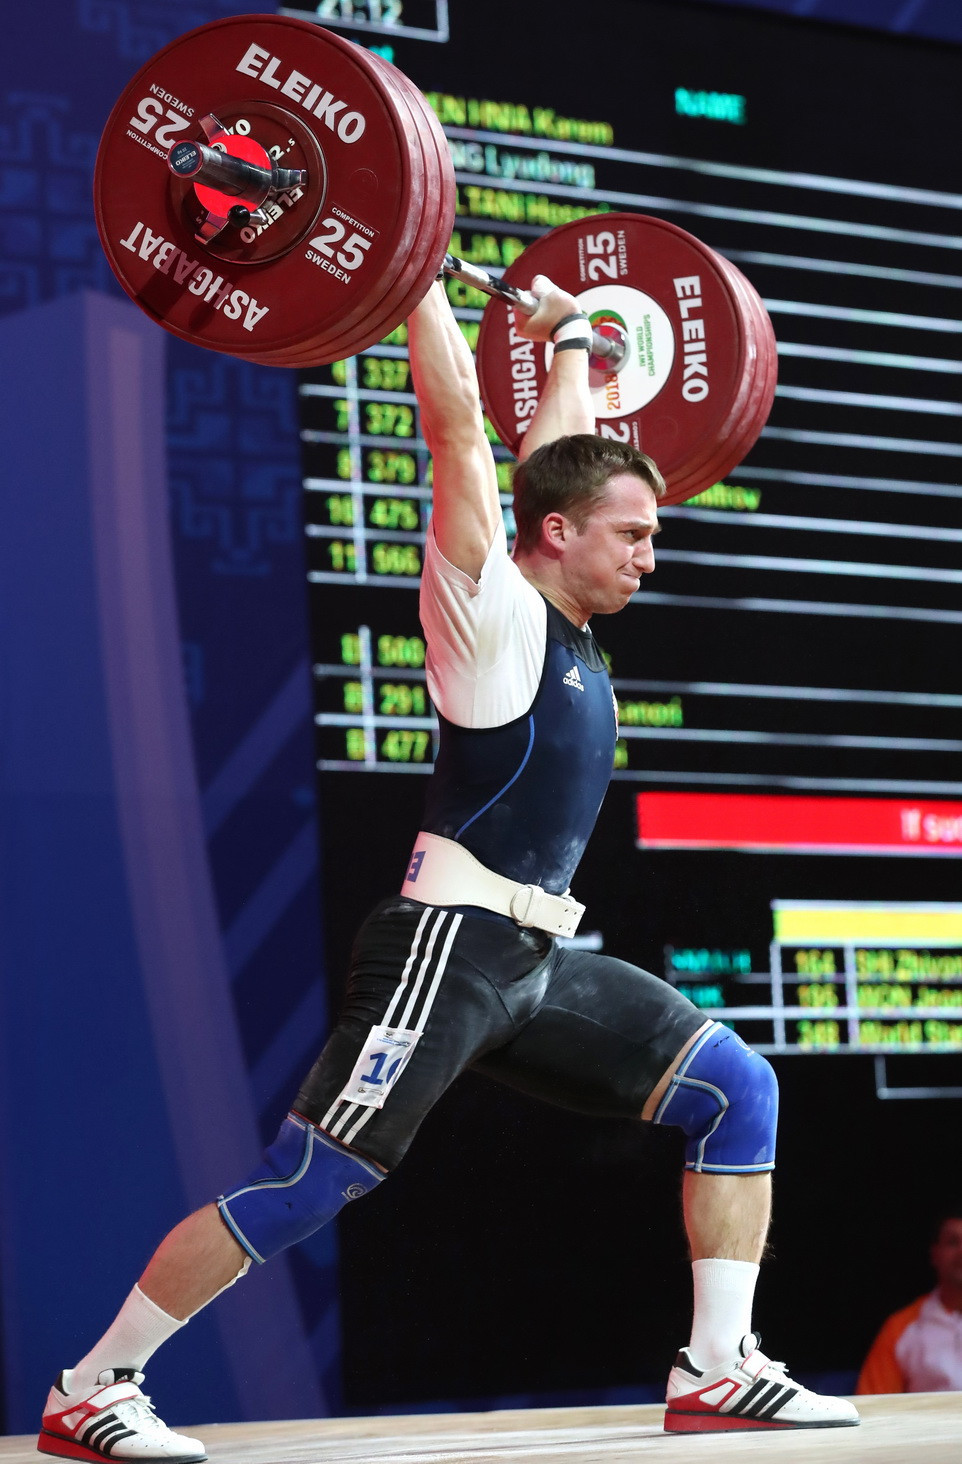 Completing the overall podium was Belarus' Vadzim Likharad ©IWF